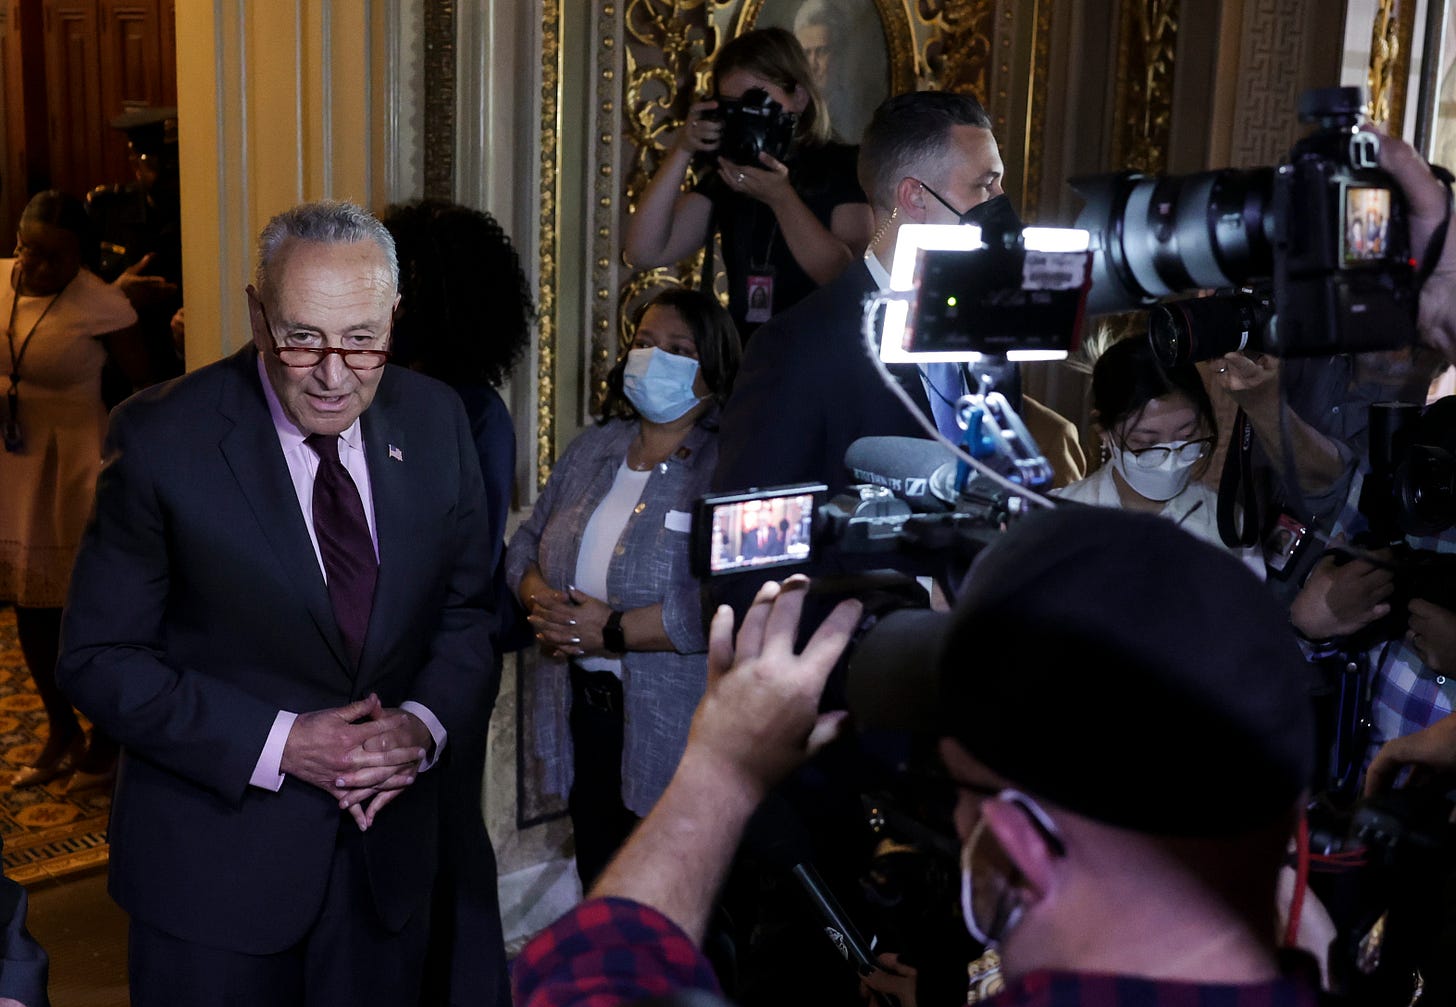 U.S. Senate Majority Leader Charles Schumer (D-NY) spoke to reporters outside of the Senate chamber at the U.S. Capitol on May 11, 2022 in Washington, DC. The Democrats failed to advance a bill that would codify and expand abortion rights, with all Republicans and Sen. Joe Manchin (D-WV) opposing the measure. (Photo by Kevin Dietsch/Getty Images)